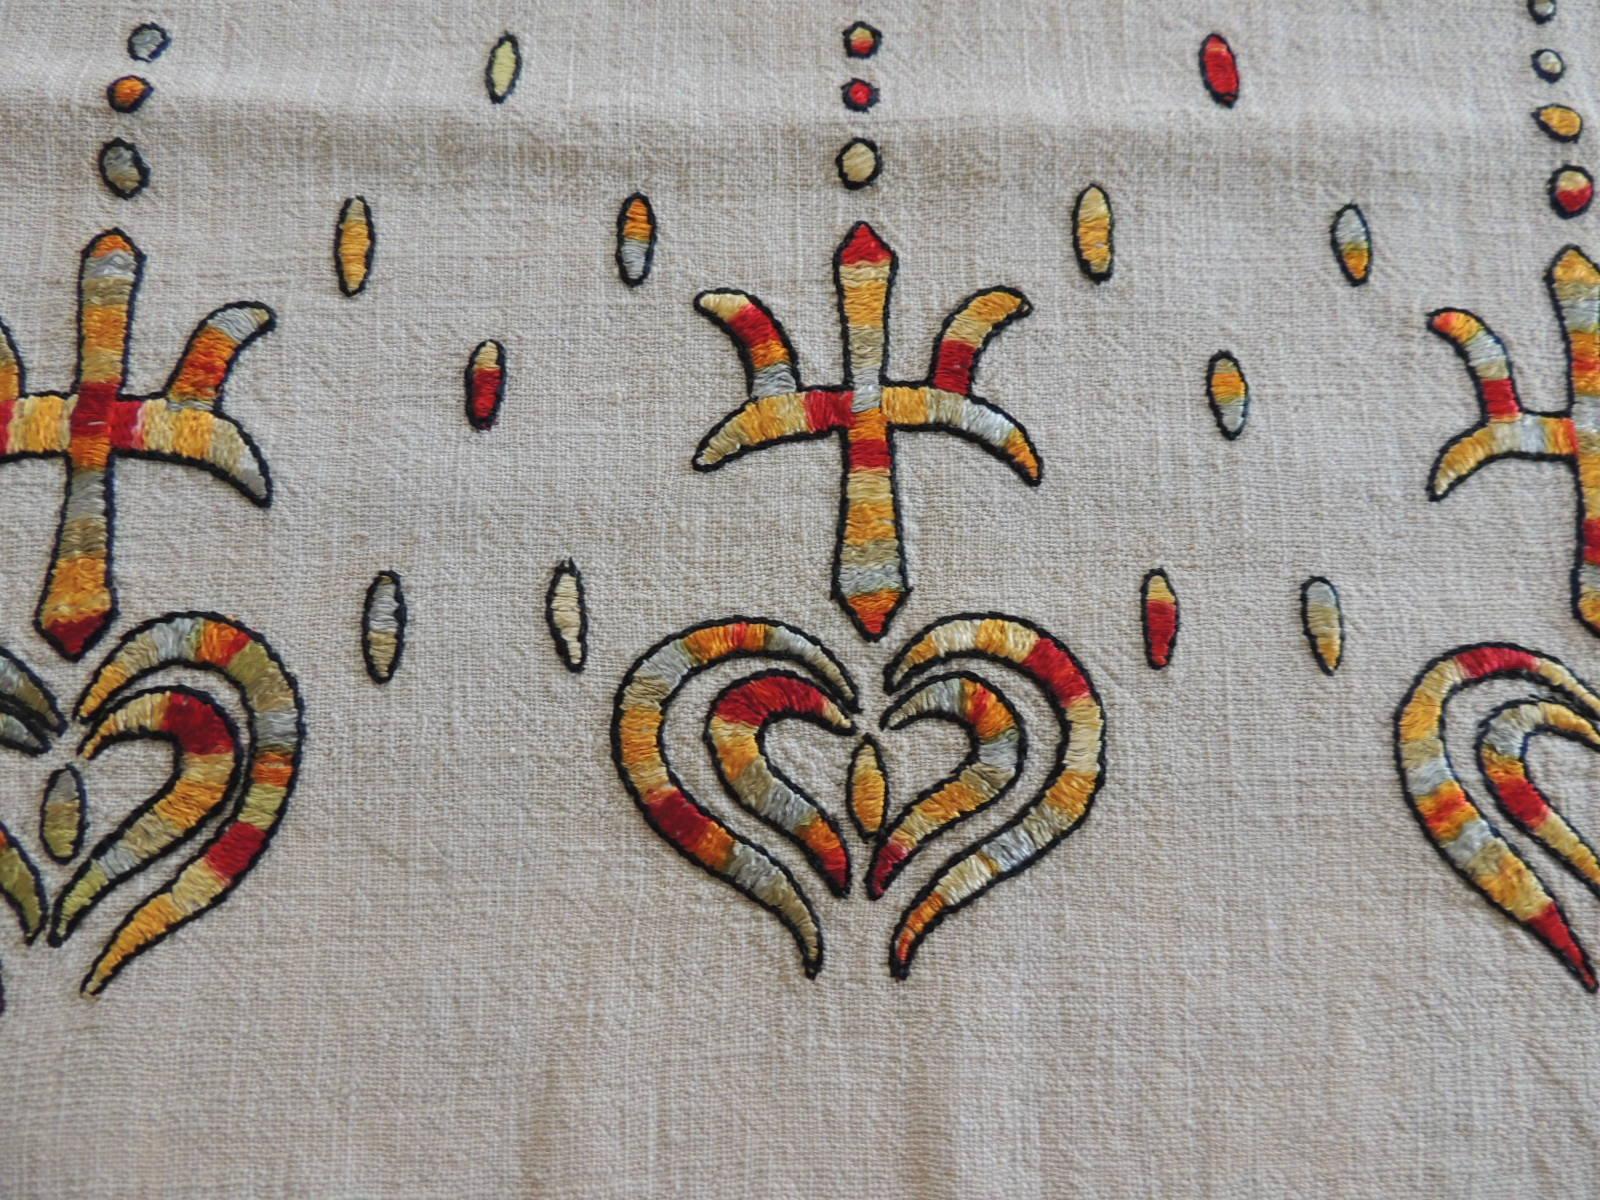 Turkish embroidered linen and silk textile.
Natural color linen embroidered with colorful silk threads in shades of orange, red, yellow and green.
(Embroidered size 18